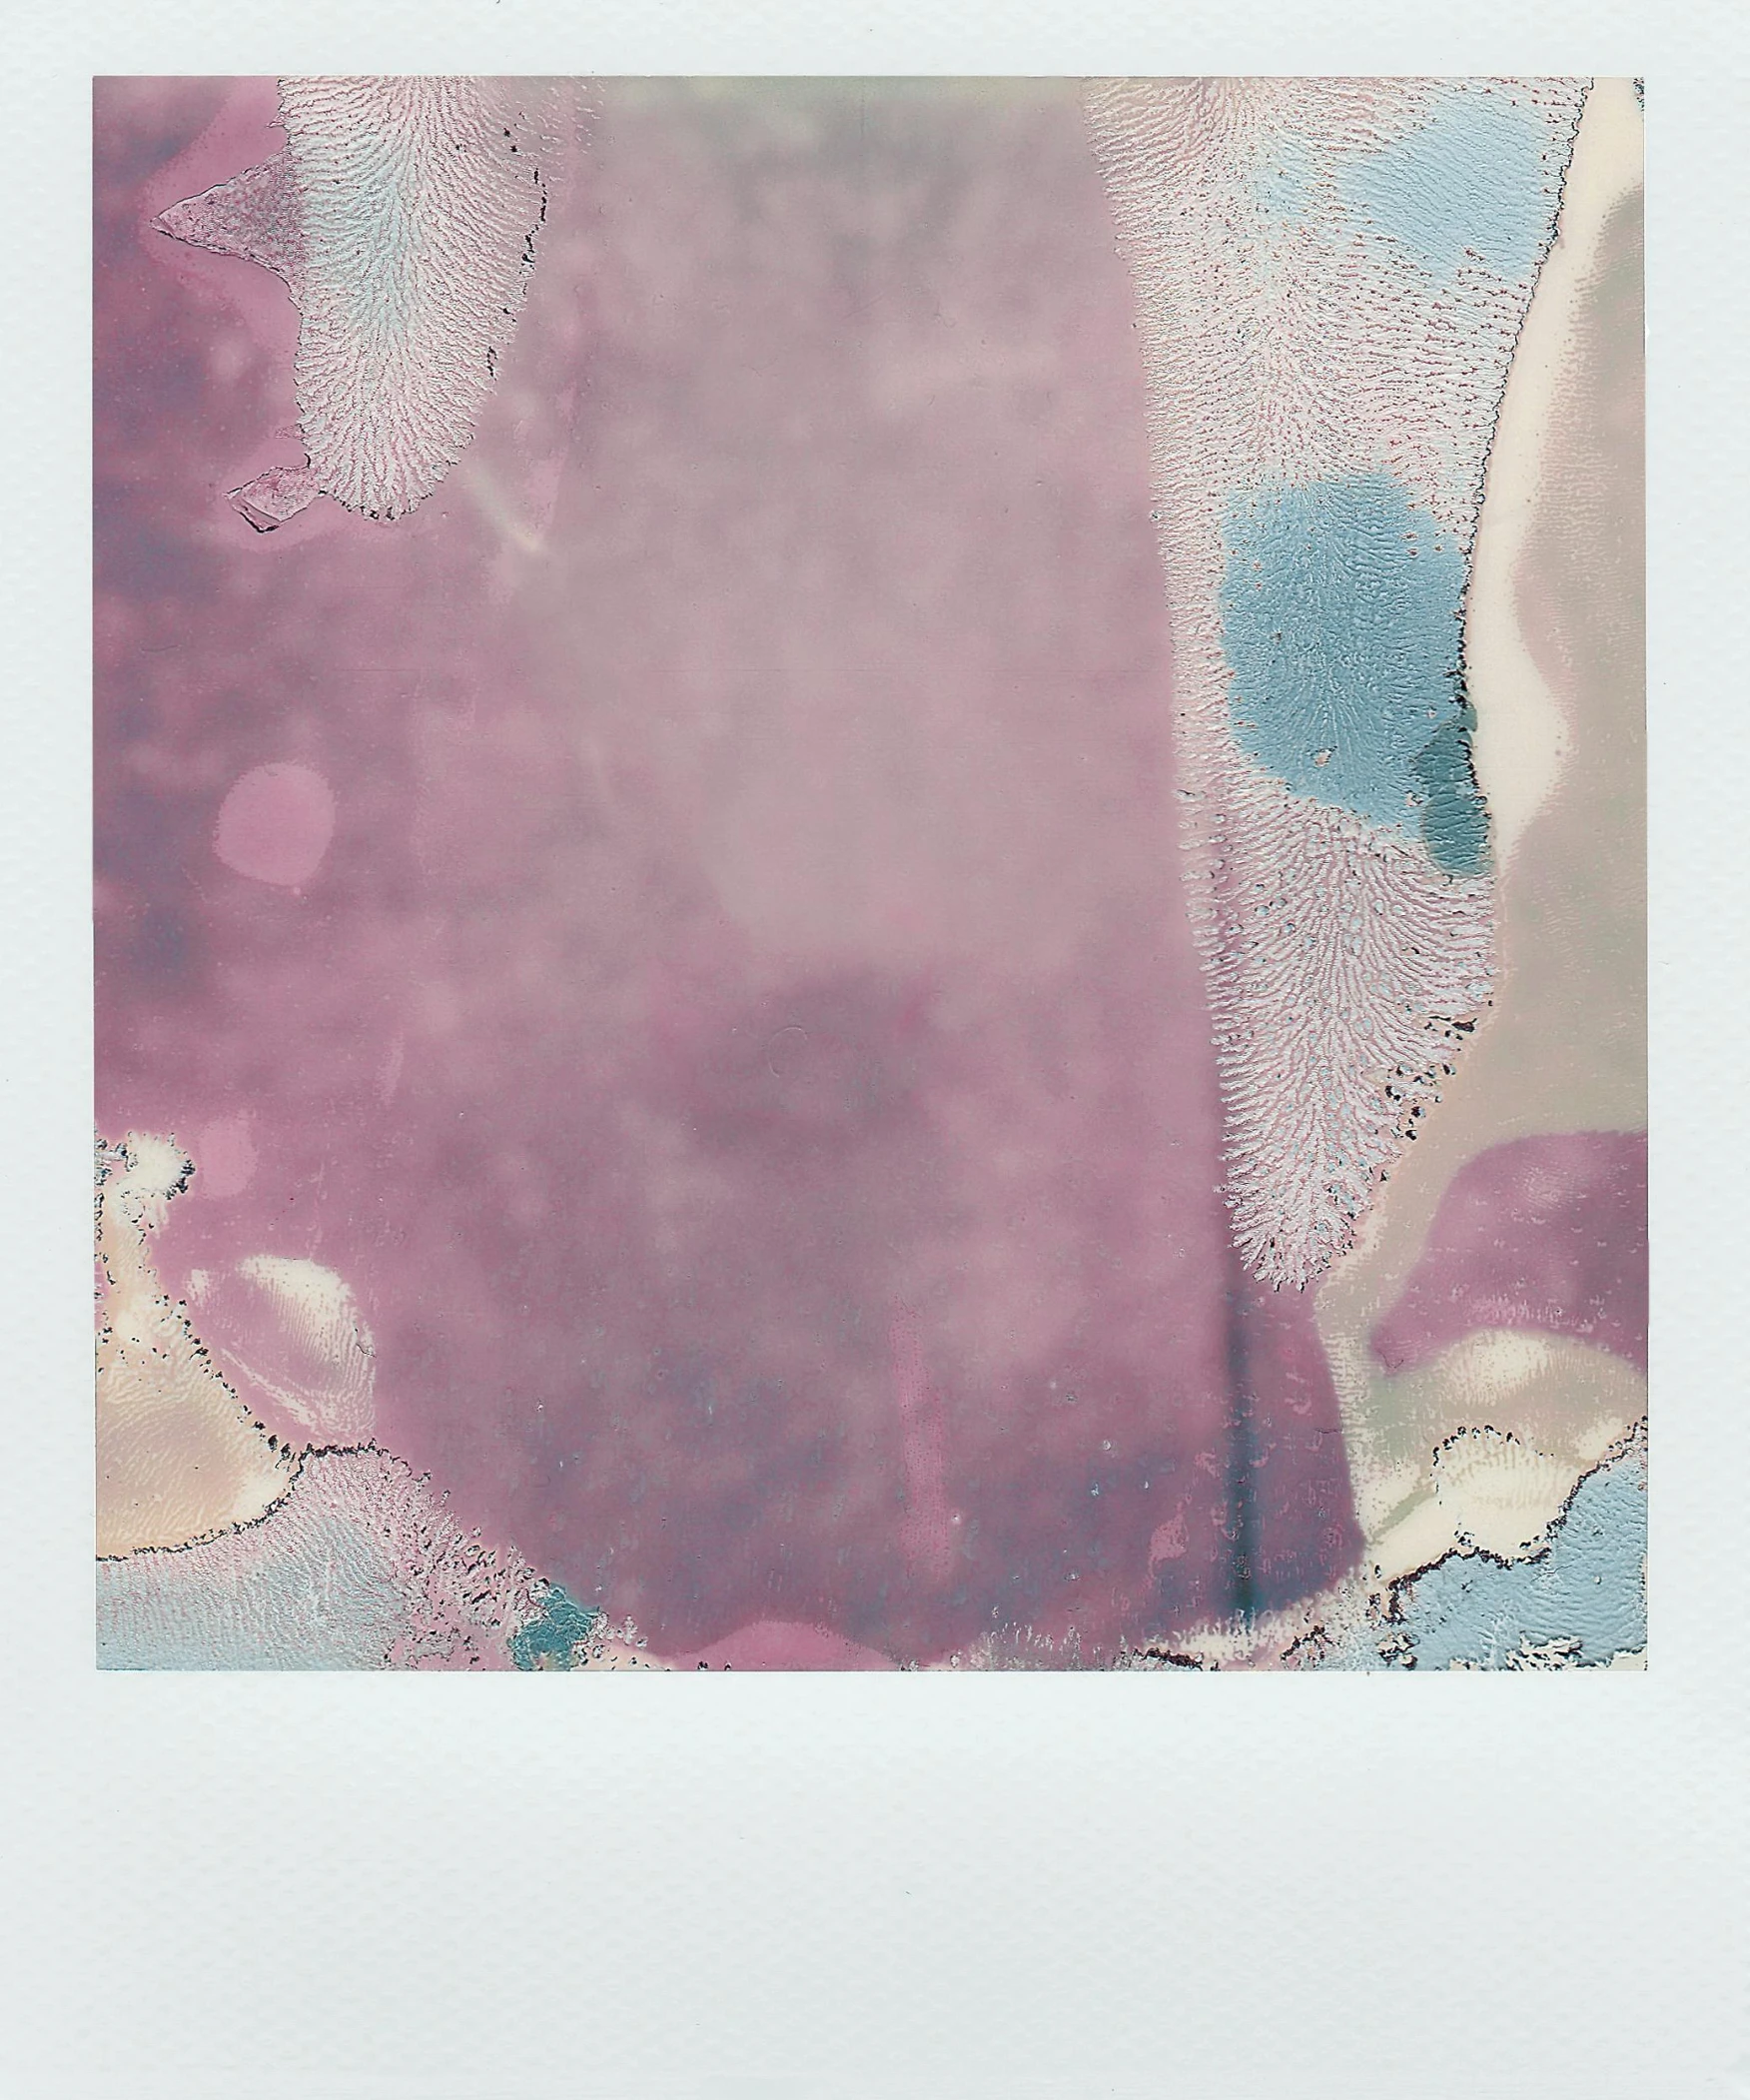 a polar polar polar polar polar polar polar polar polar polar polar polar polar polar polar polar polar polar polar polar polar polar polar polar polar polar polar, a polaroid photo, inspired by Julian Schnabel, color field, abstracted, in style of petra collins, squashed berry stains, 1960s color photograph